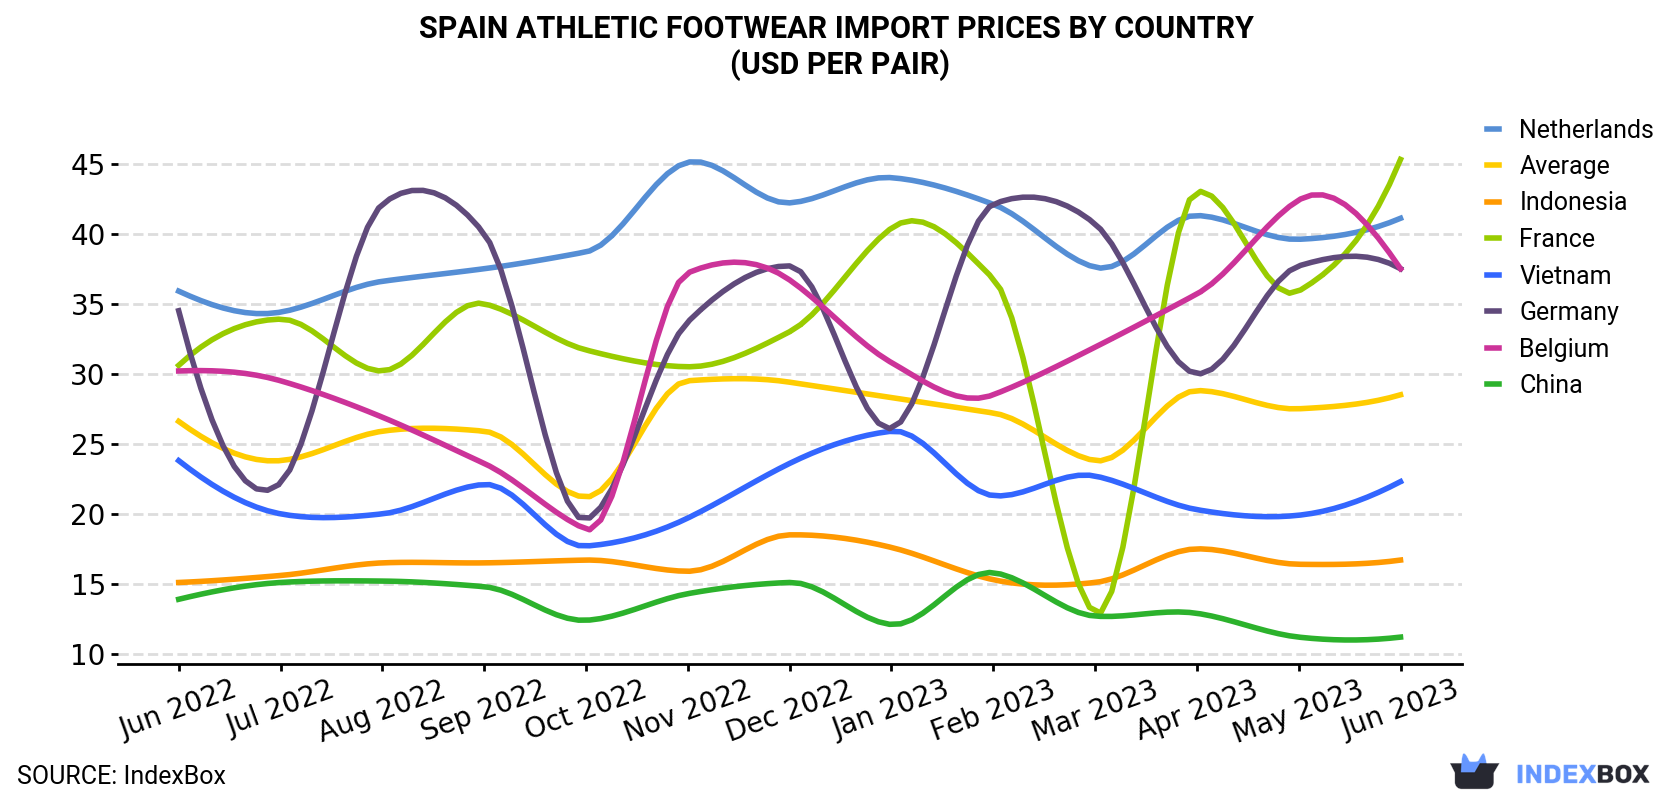 Spain Athletic Footwear Import Prices By Country (USD Per Pair)